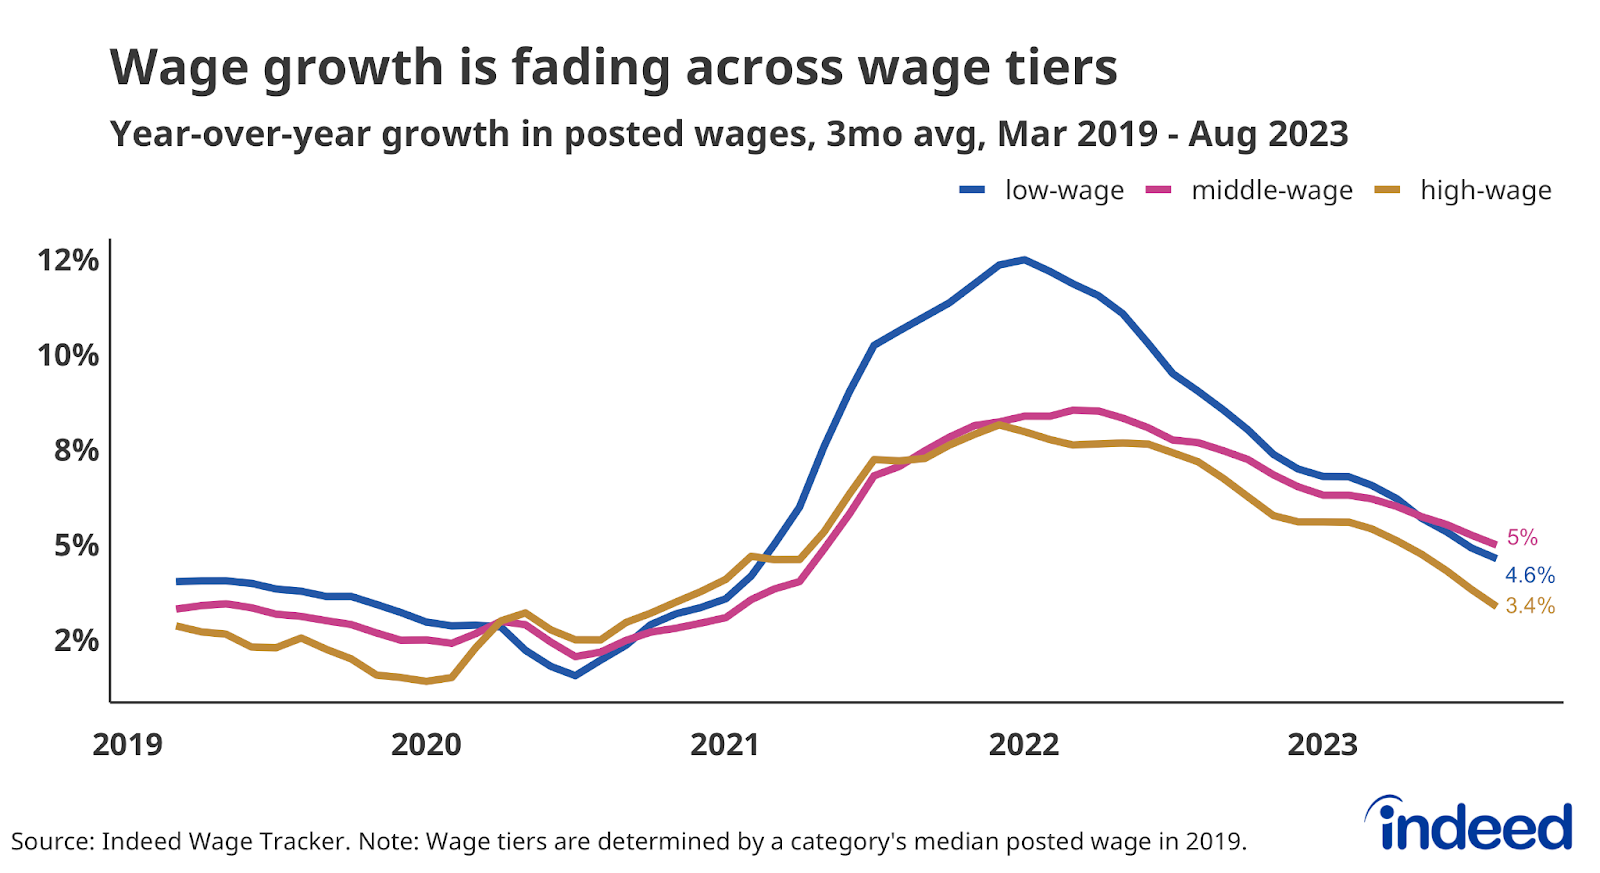 Line graph titled “Wage growth is fading across wage tiers” with a vertical axis from 2% to 12%. The graph covers from March 2019 to August and shows a much quicker rise in wage growth in low-wage sectors in 2021 and a steeper descent in 2022. However recent data has shown a more even decline in 2023. 